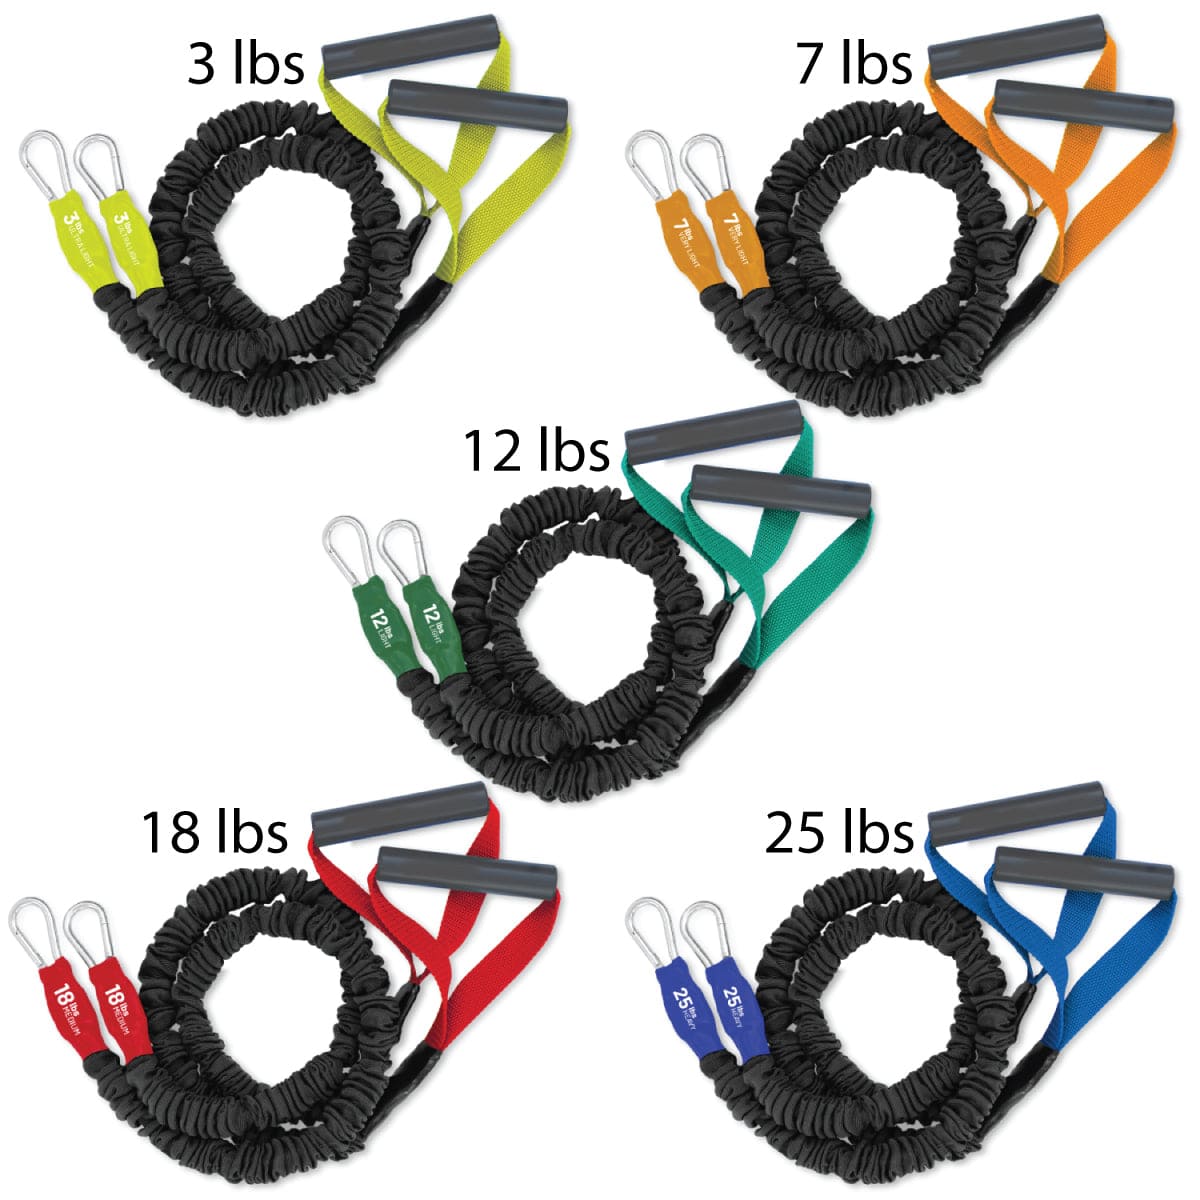 X-Over Resistance Band 5 Packs